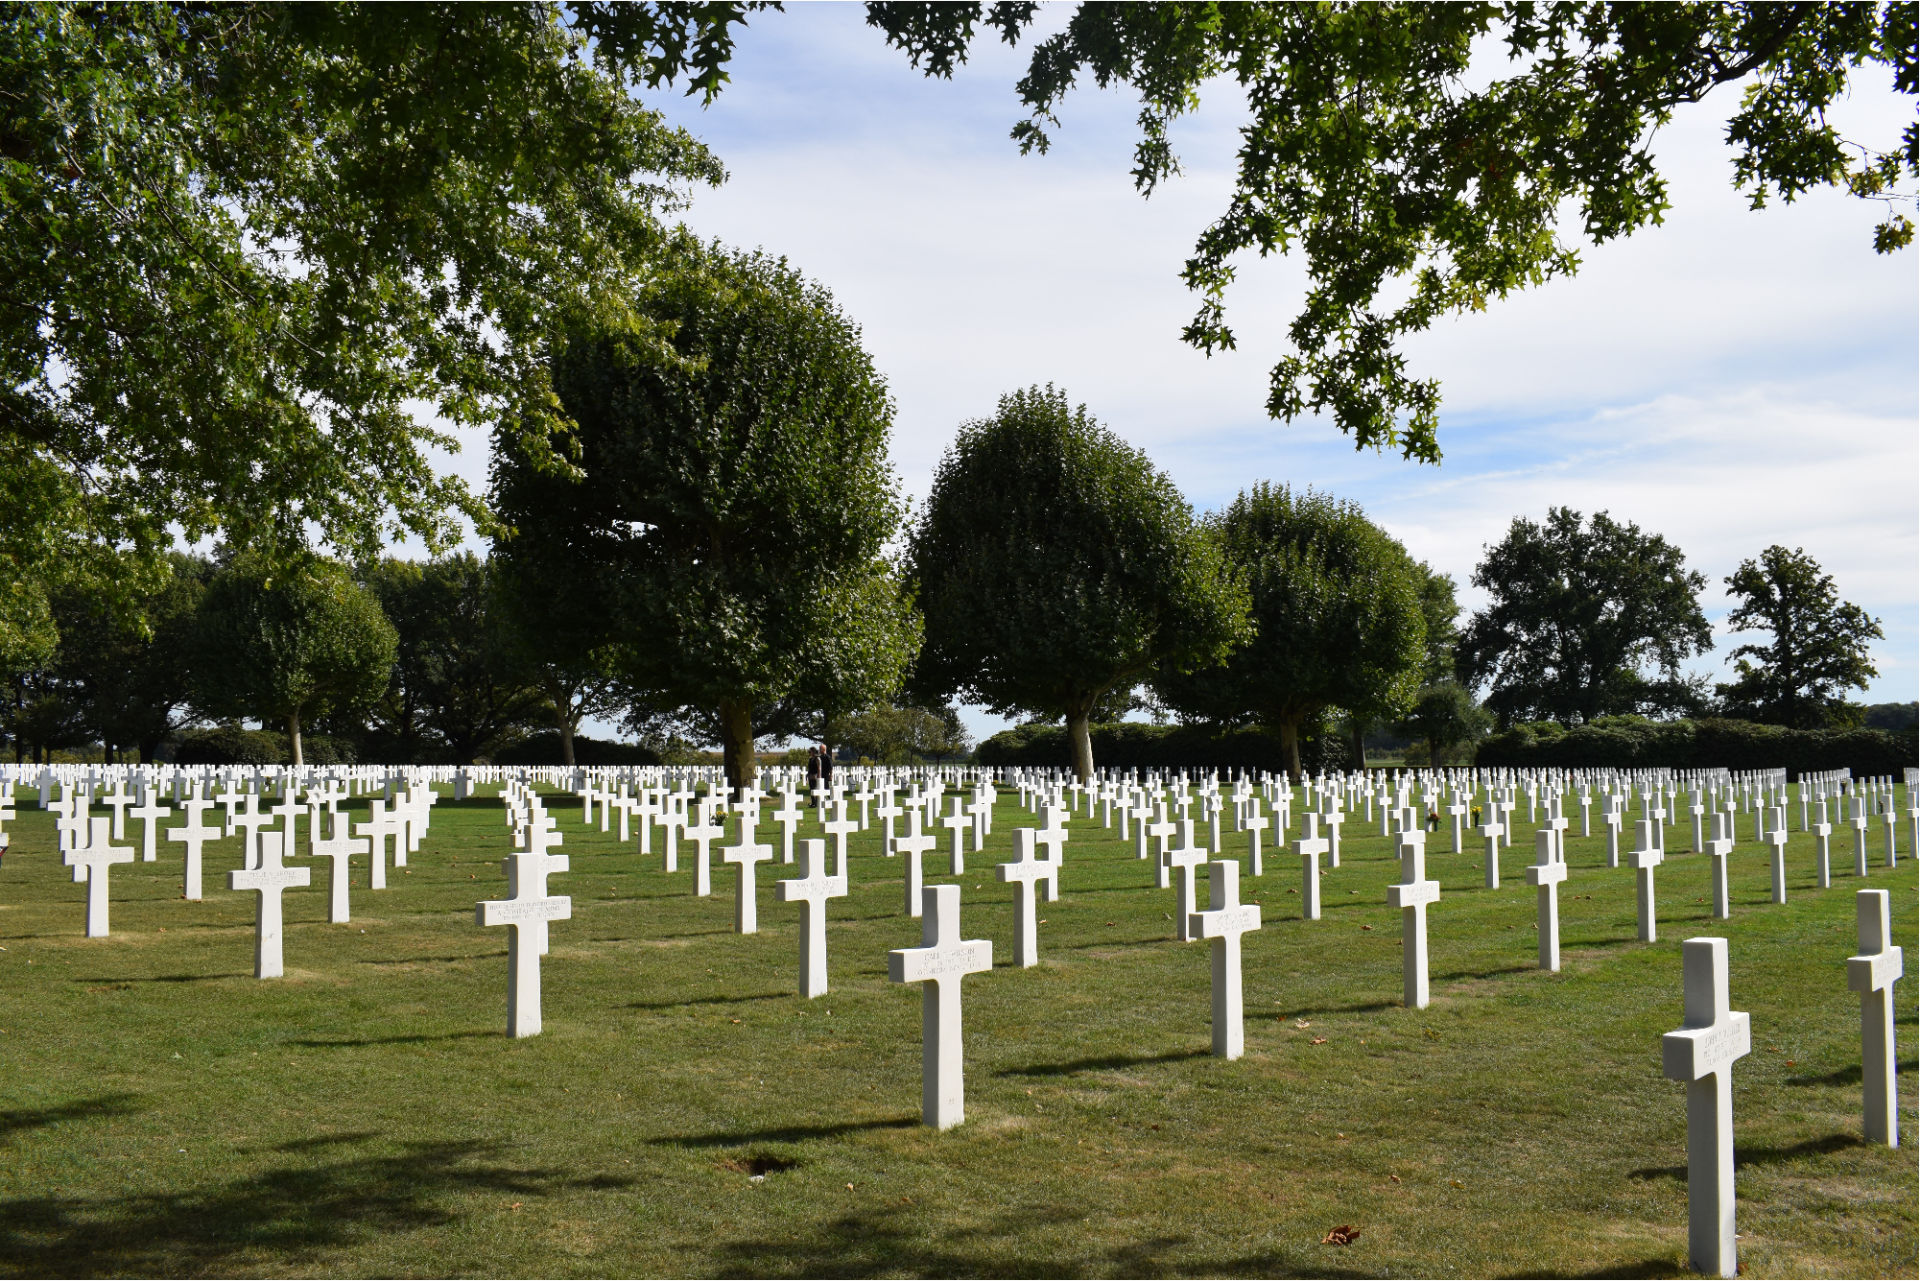 The American Cemetery and Memorial